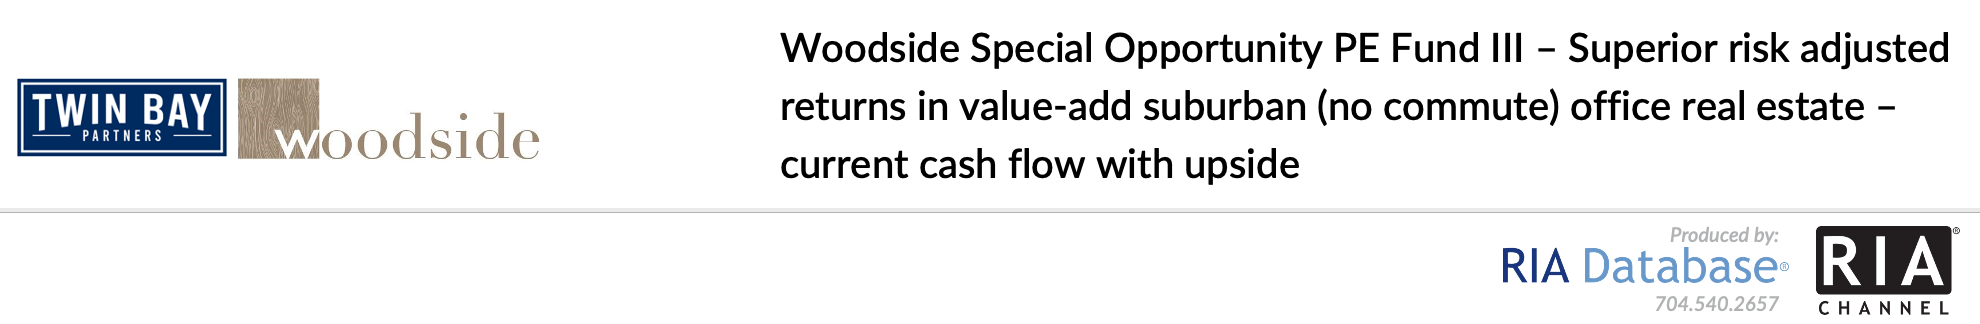 Woodside Special Opportunity PE Fund III - Superior risk adjusted returns in value-add suburban (no commute) office real estate – current cash flow with upside